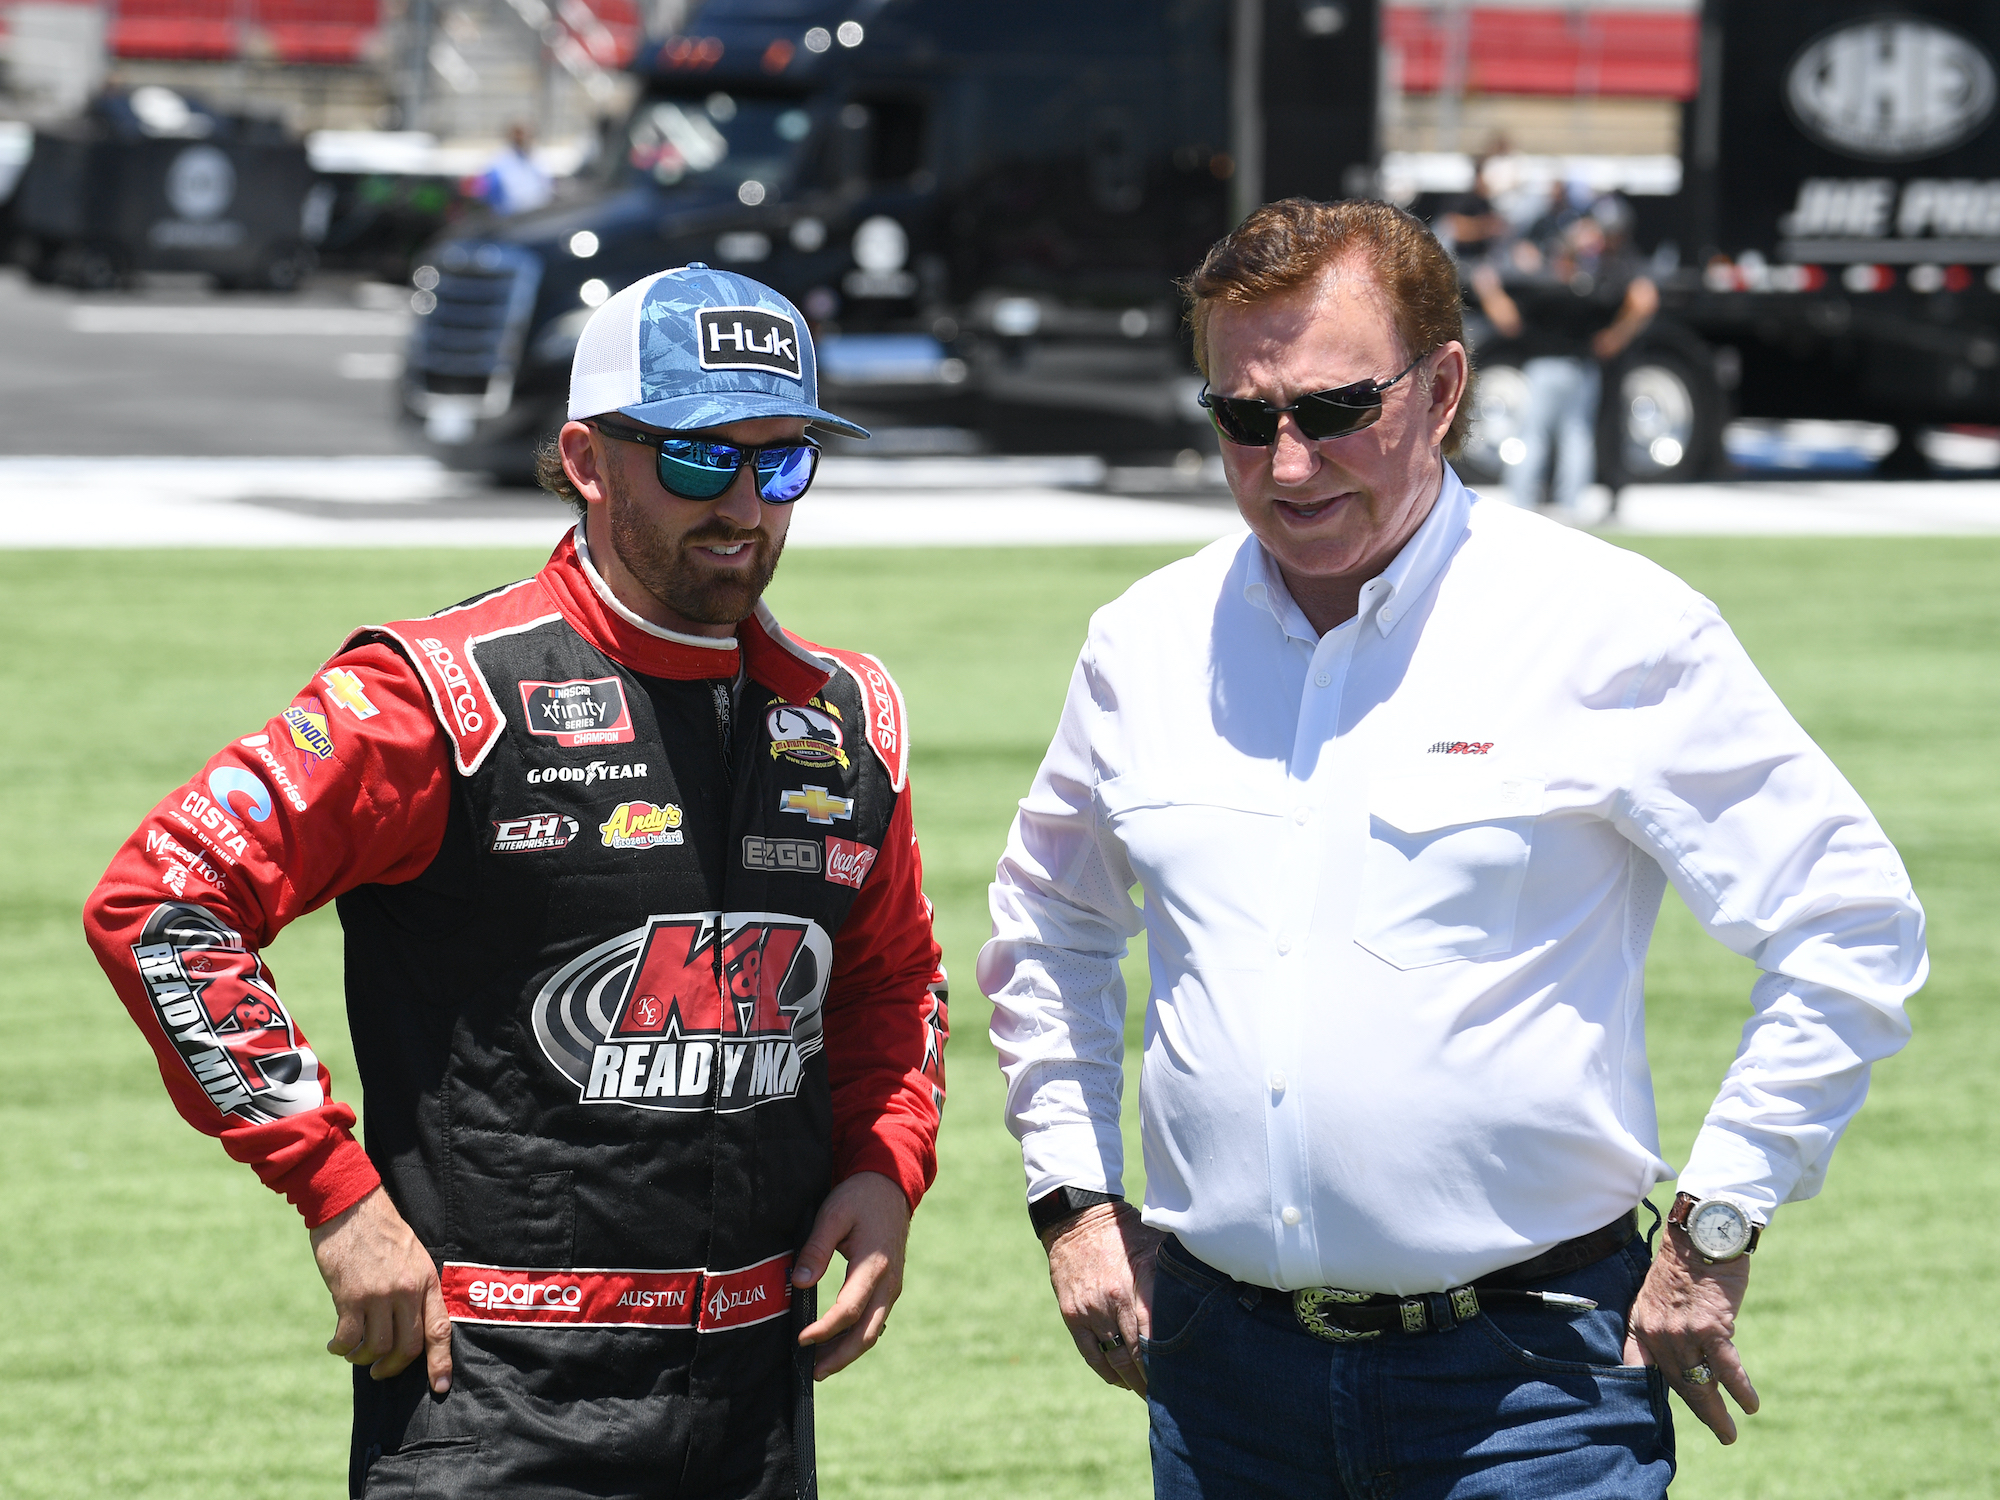 NASCAR Savagely Mocks Richard Childress Racing on Twitter During New Hampshire Race, Concluding a Bad Week for the Organization